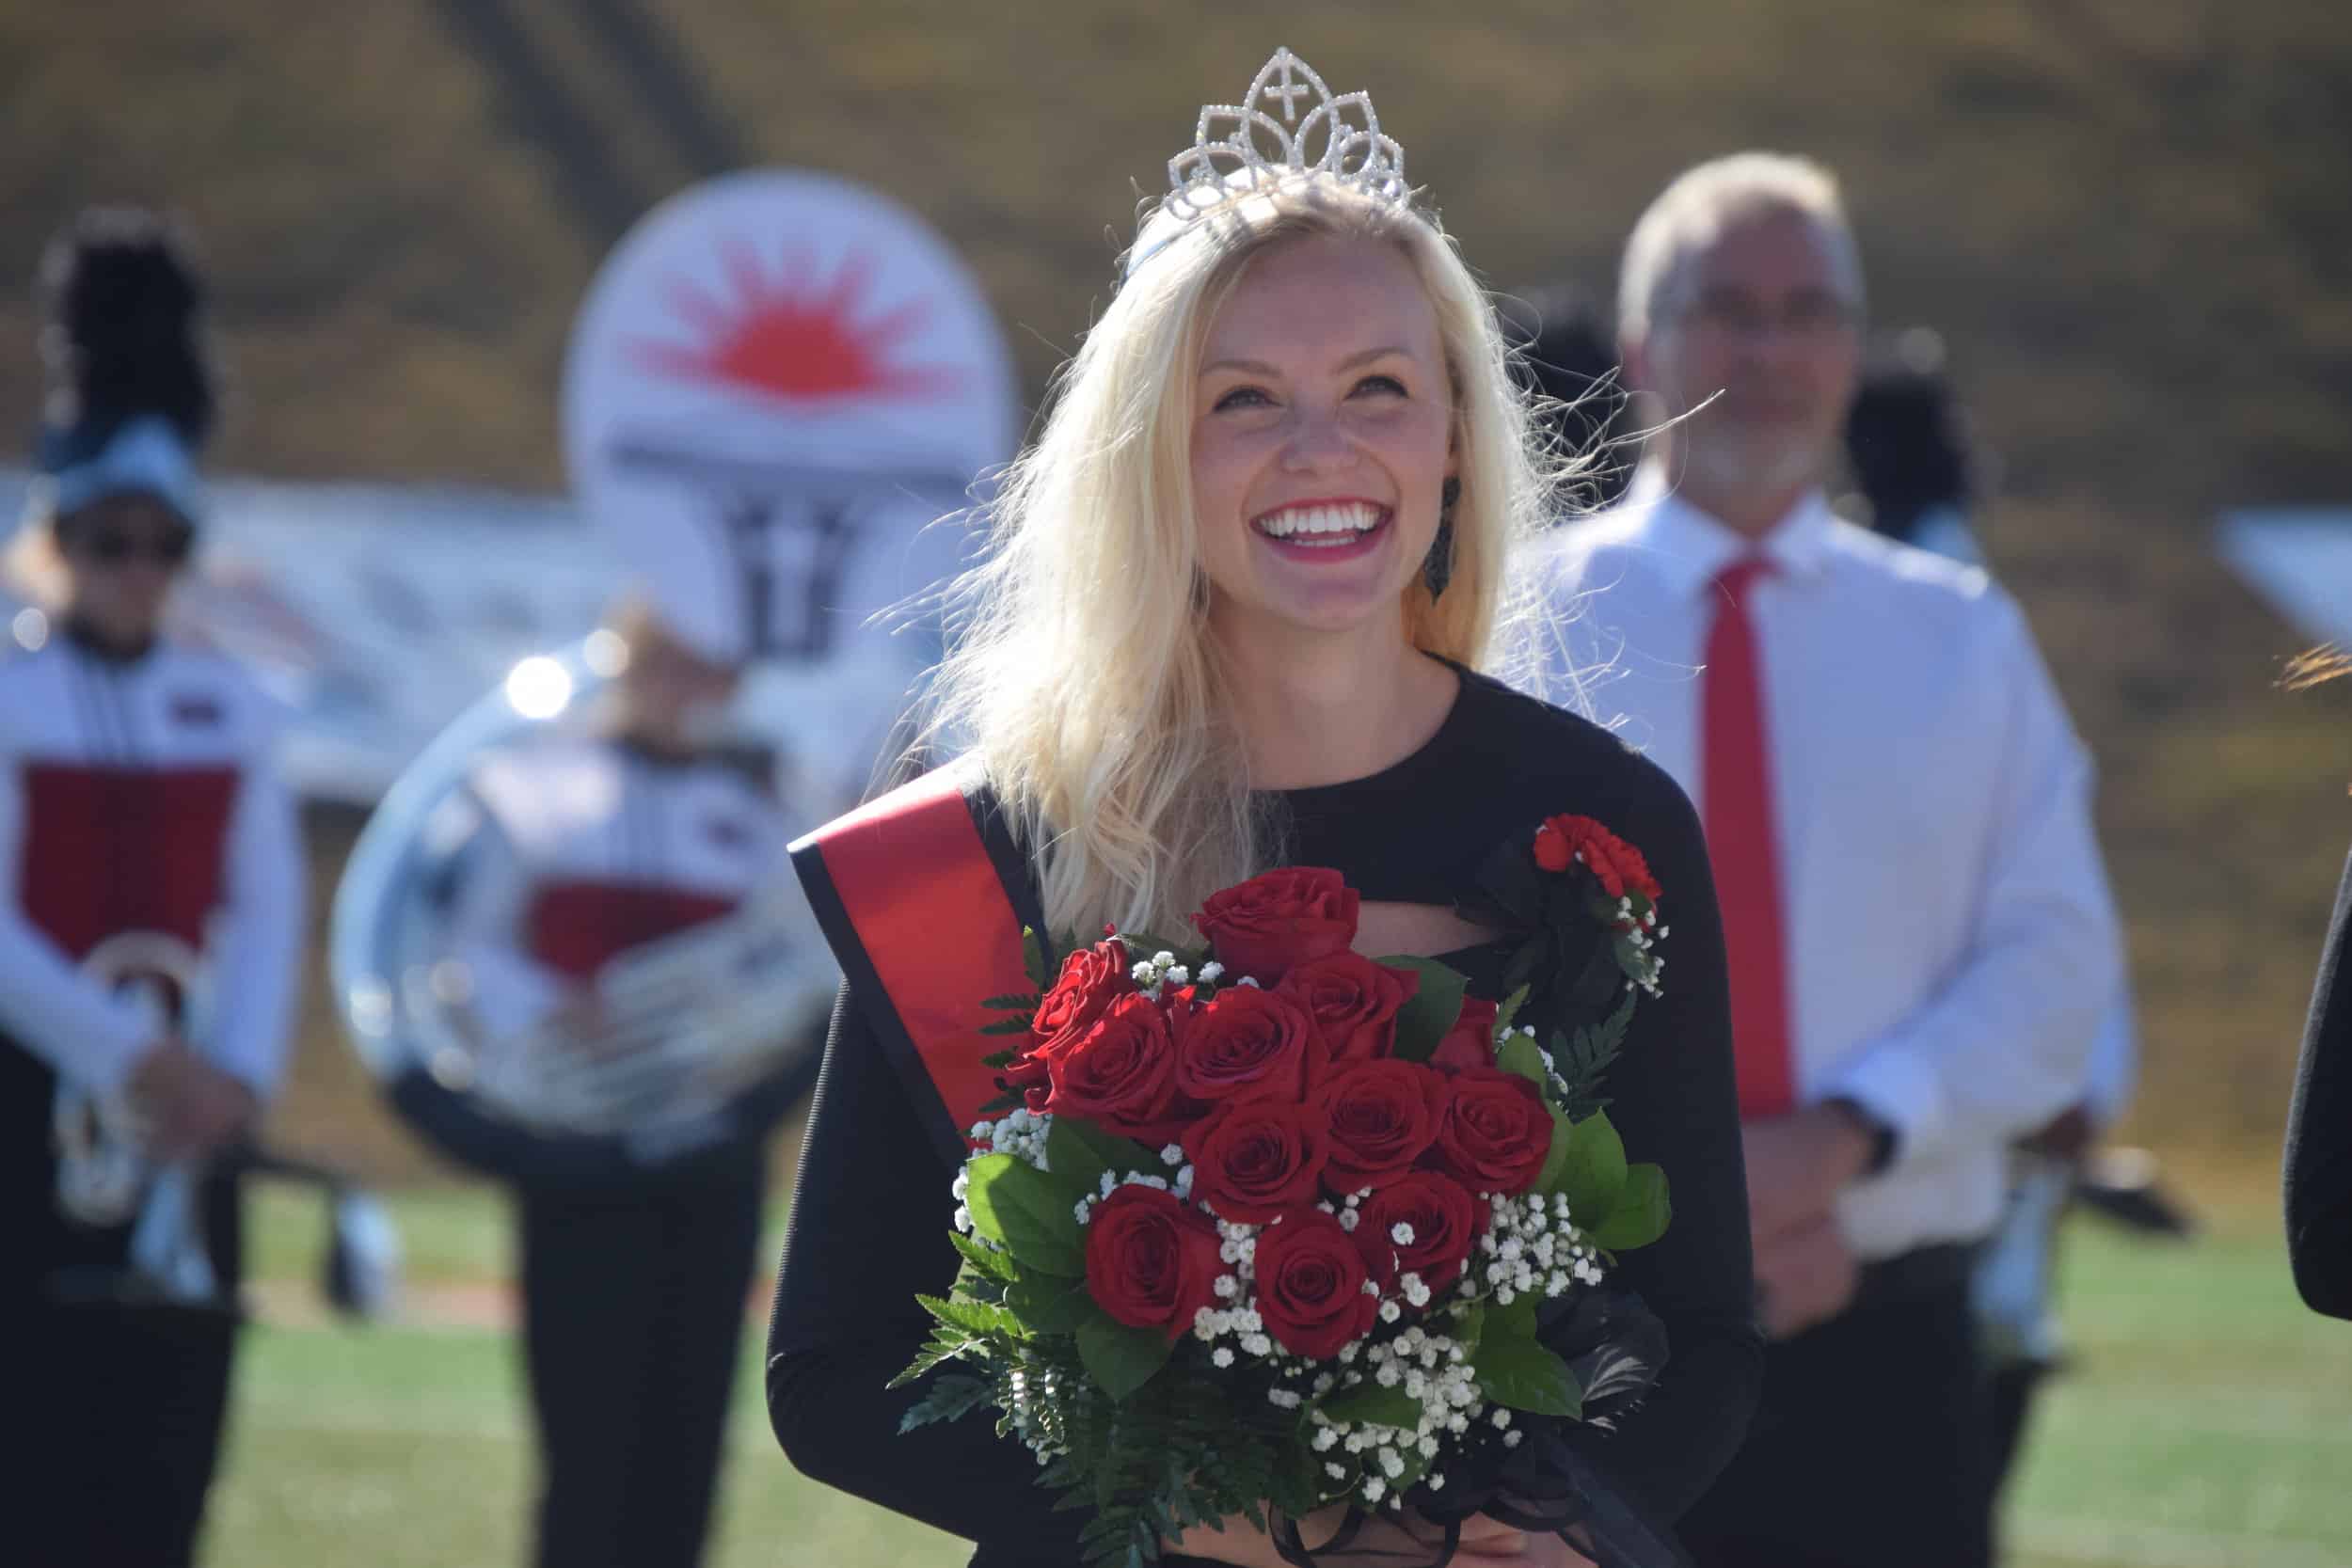 Stevie Martin shows her excitement after being crowned Homecoming Queen.